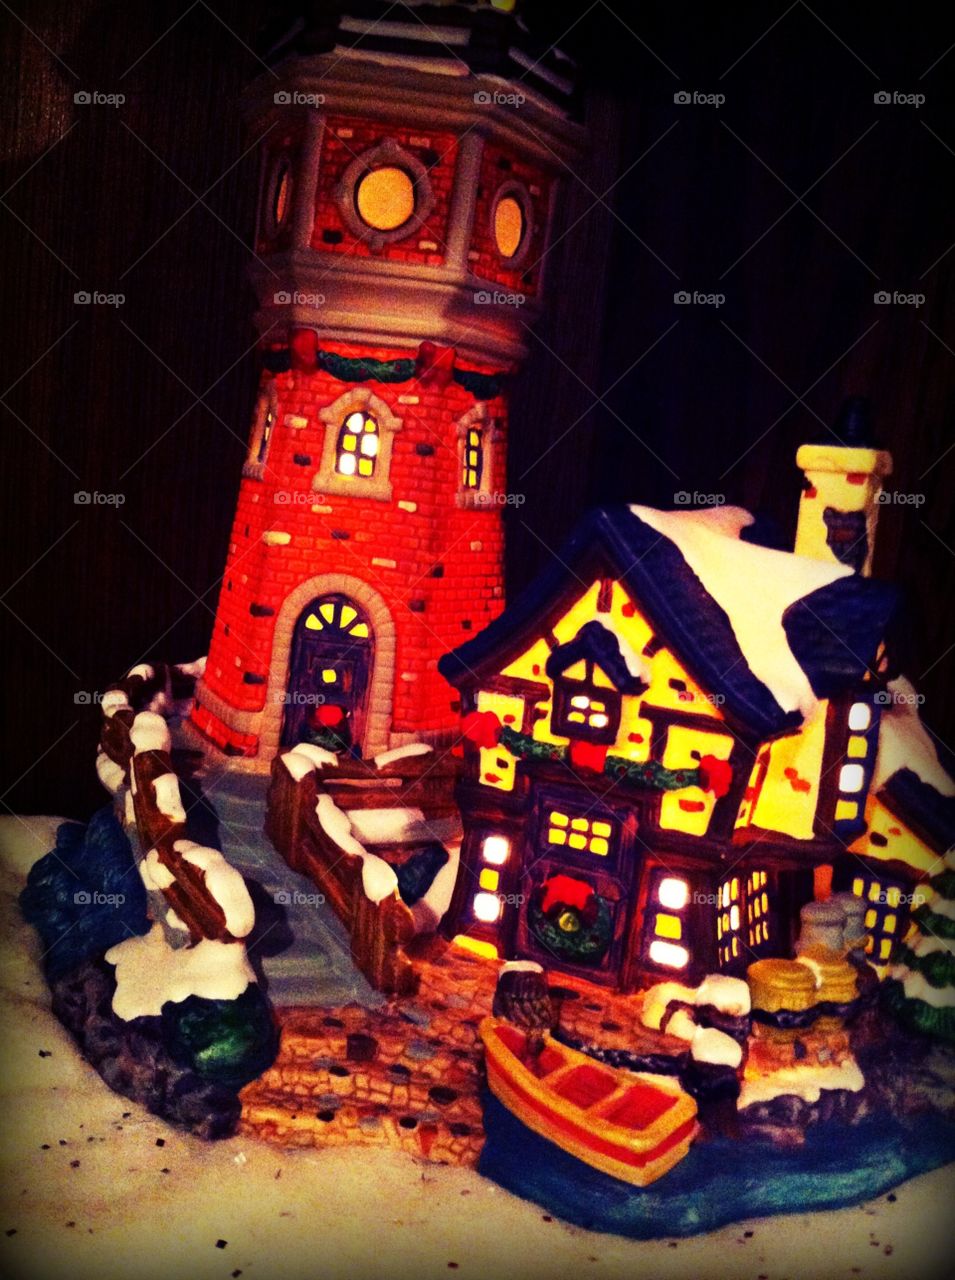 Light House . Taken very close to our small ceramic Christmas village.